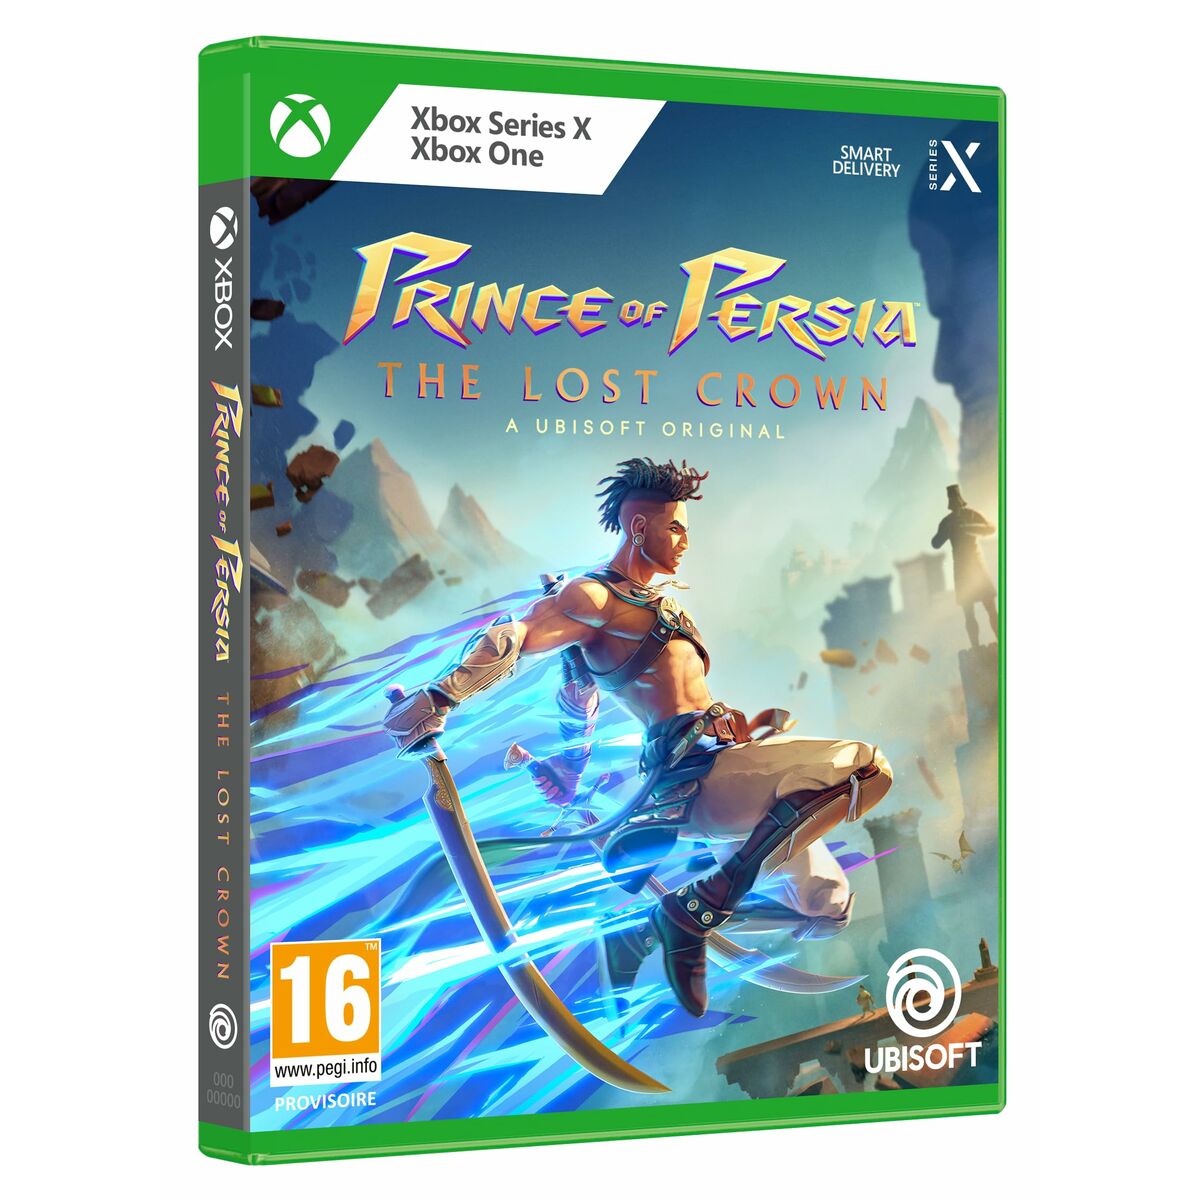 Xbox One / Series X Video Game Ubisoft Prince of Persia: The Lost Crown (FR)